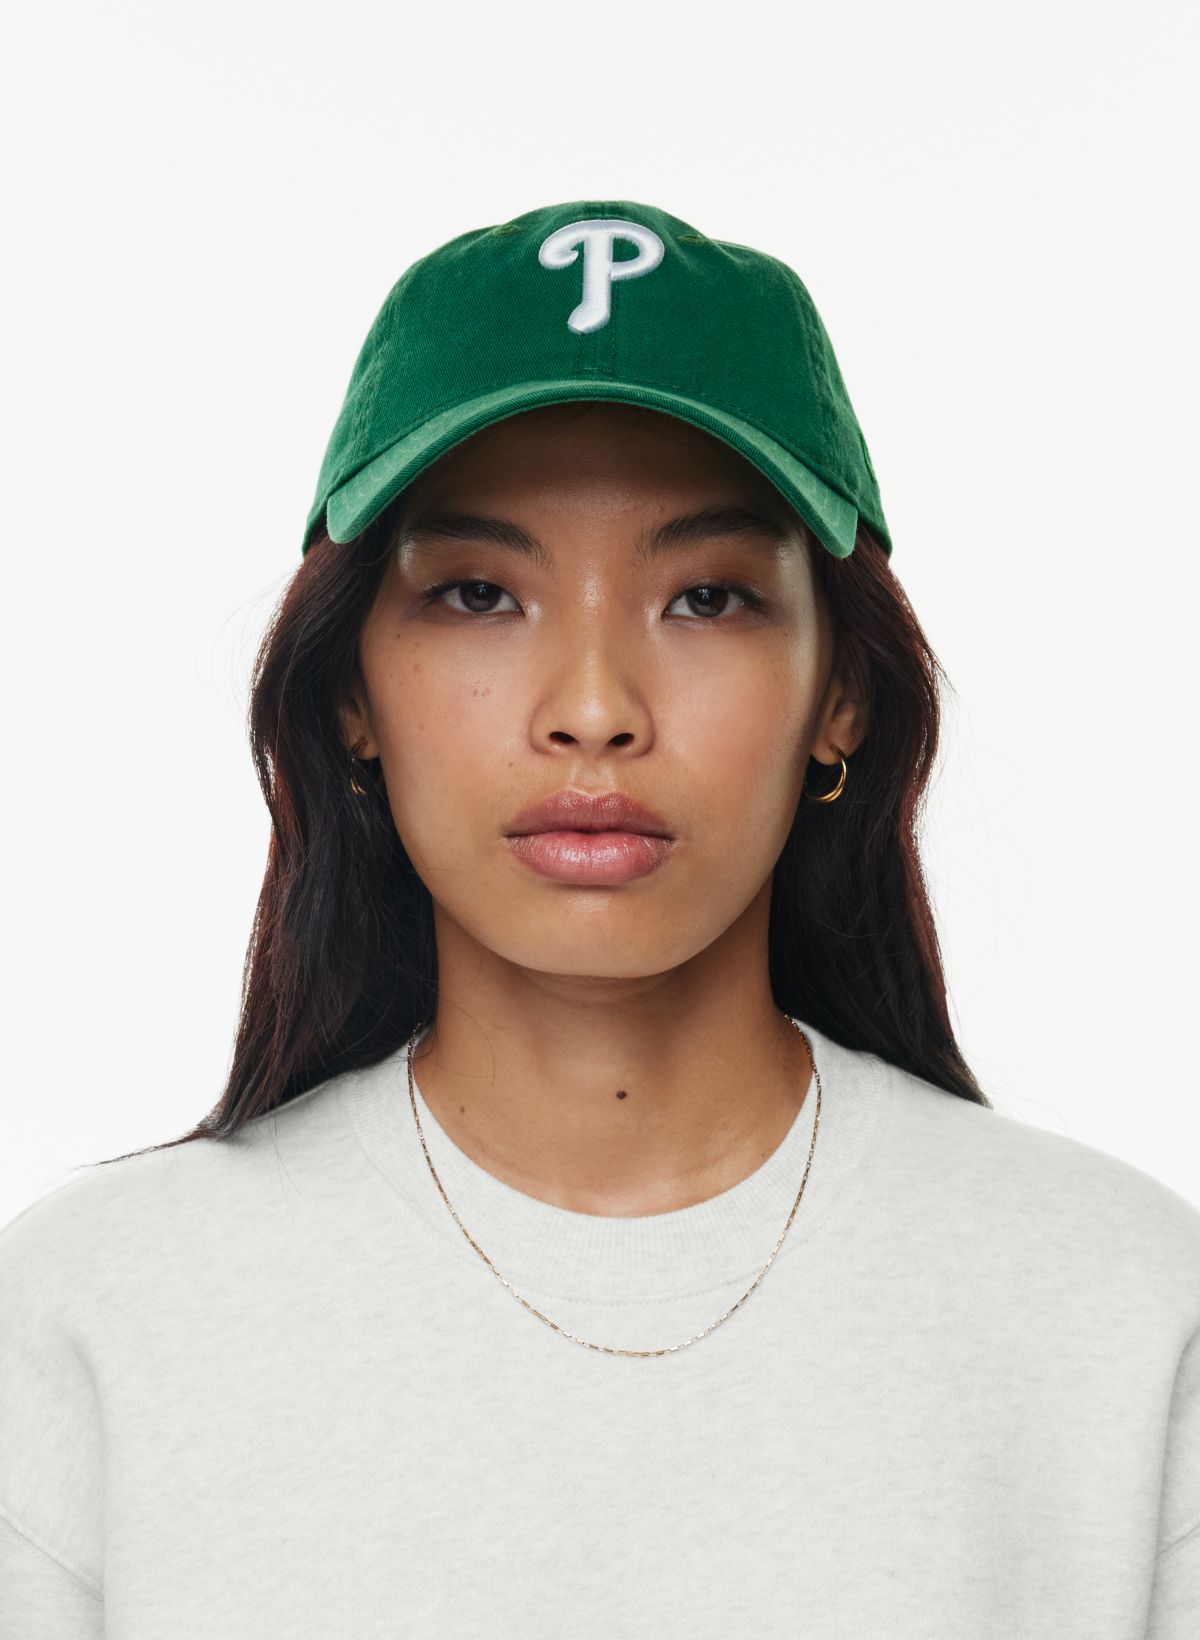 Plus Size Phillies Shirt For Women - Shop our Wide Selection for 2023